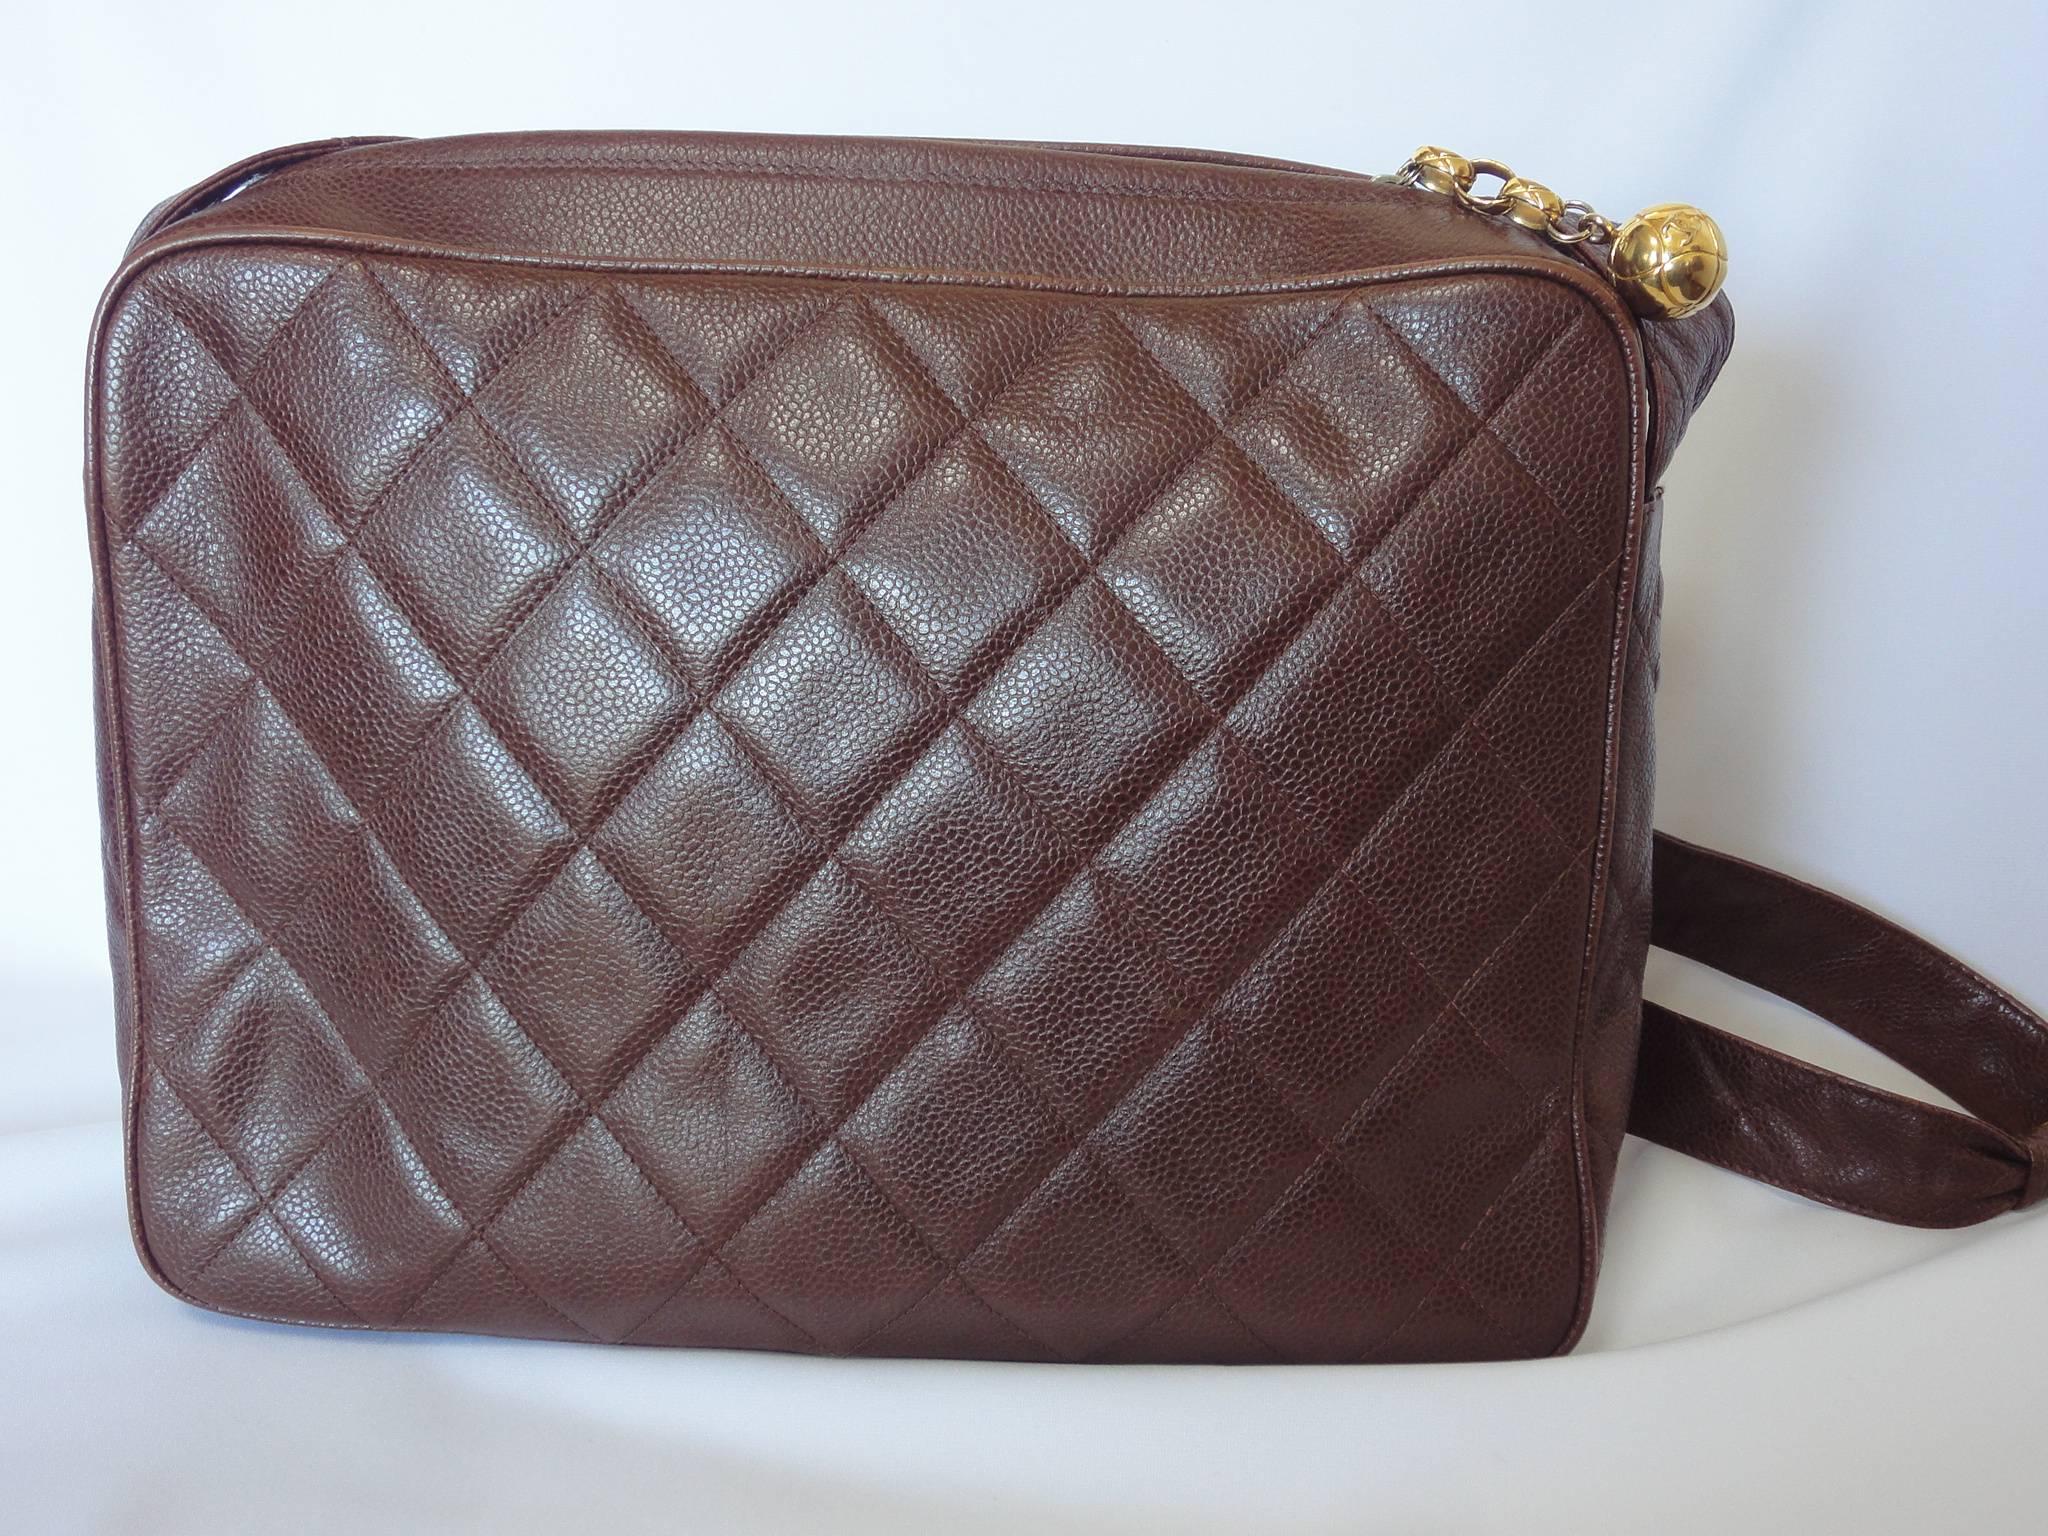 This is a rare vintage dark brown caviar leather shoulder bag from CHANEL from the 90s.
As this is a large size and square messenger bag style, it holds lots of things you need to carry.
Perfect daily use vintage Chanel bag for unisex, all